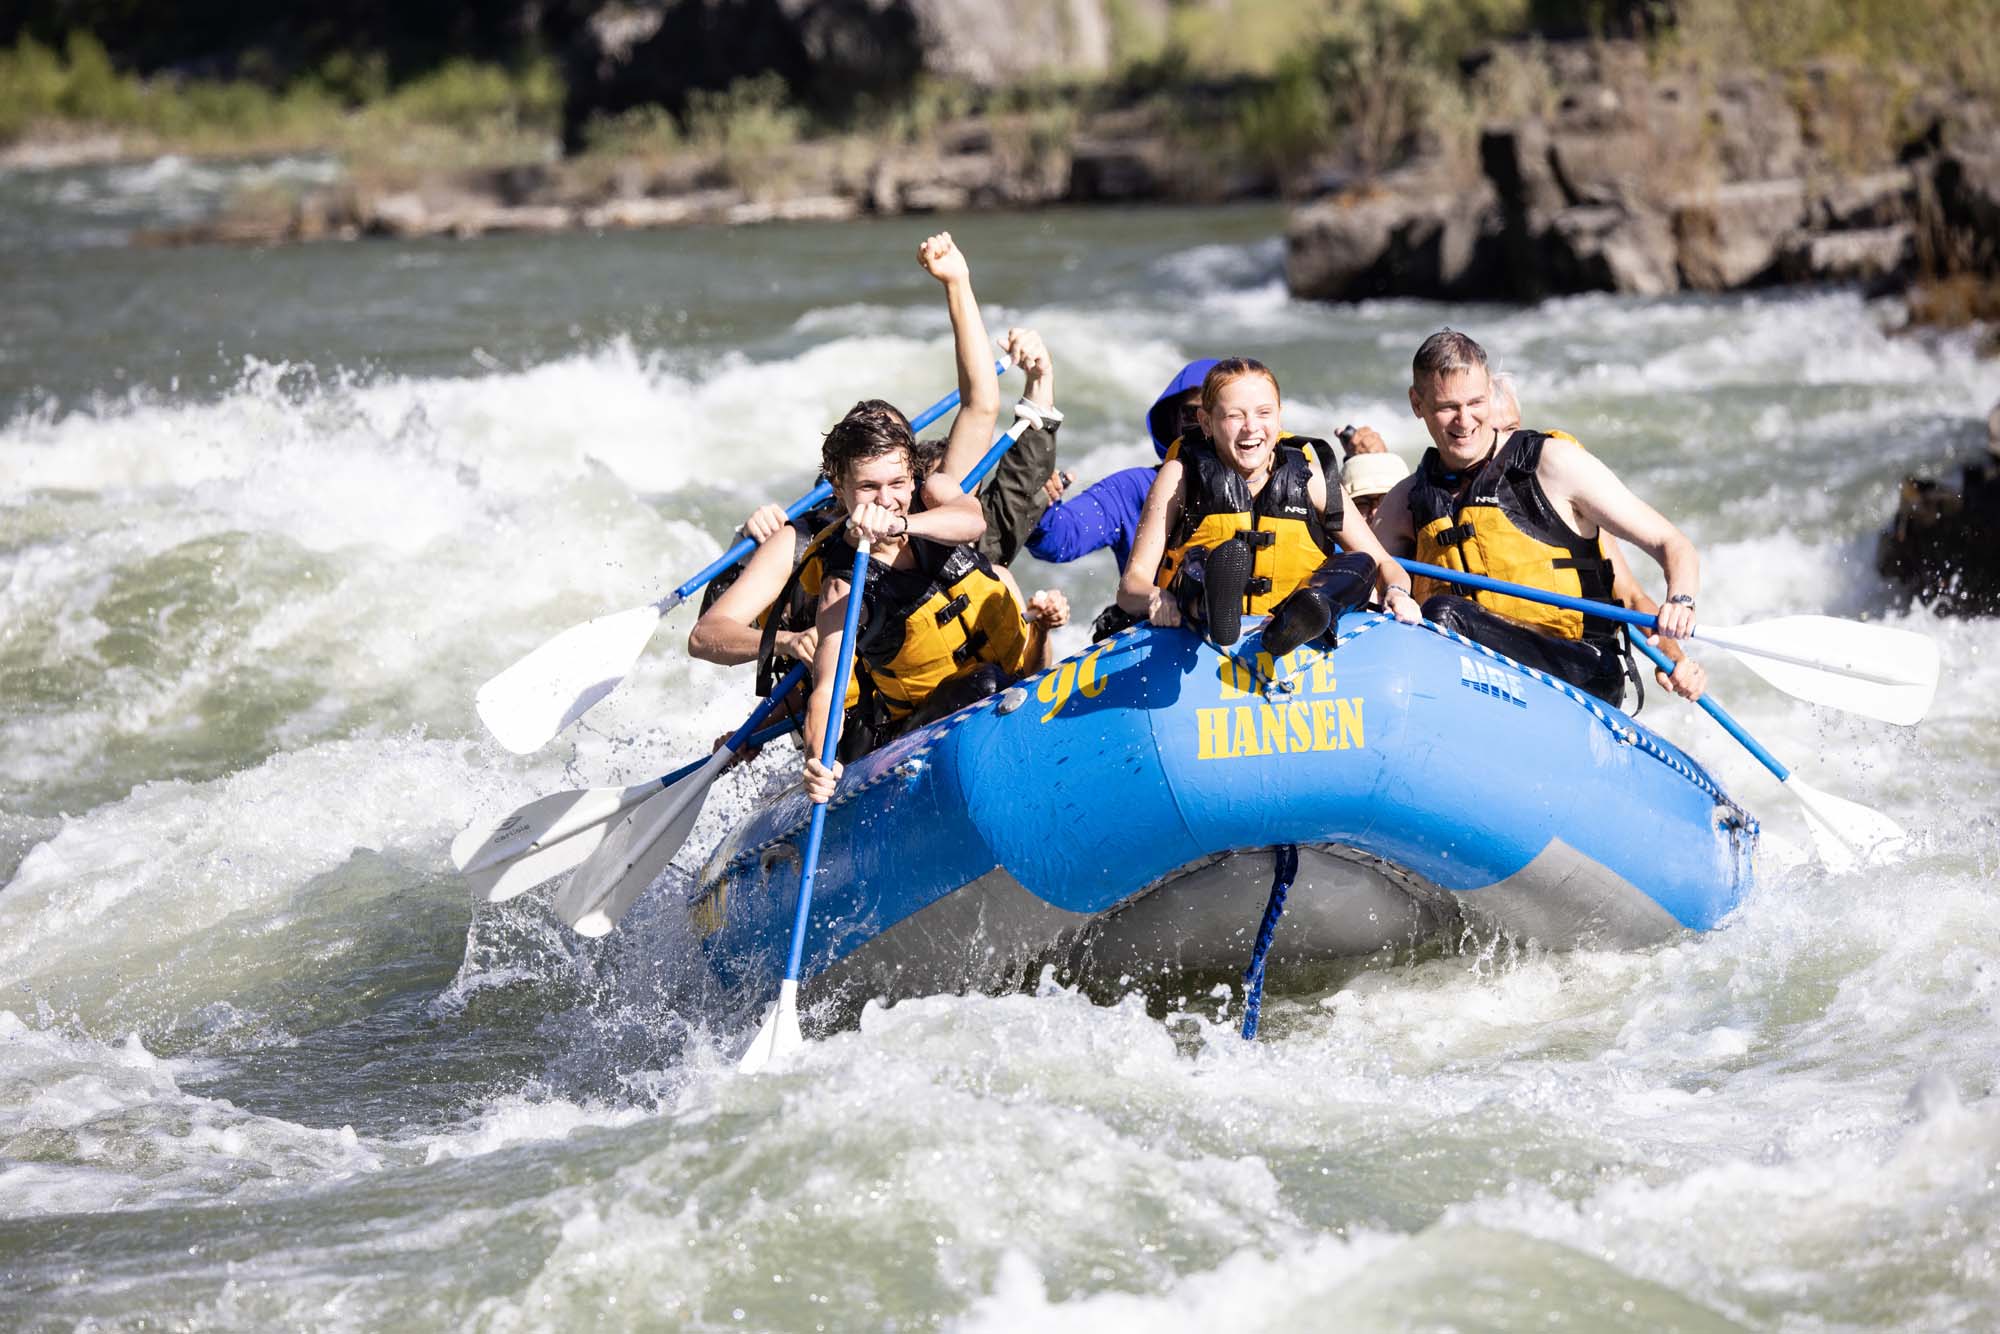 A girl smiles in the front of a whitewater raft while charging through a rapid.